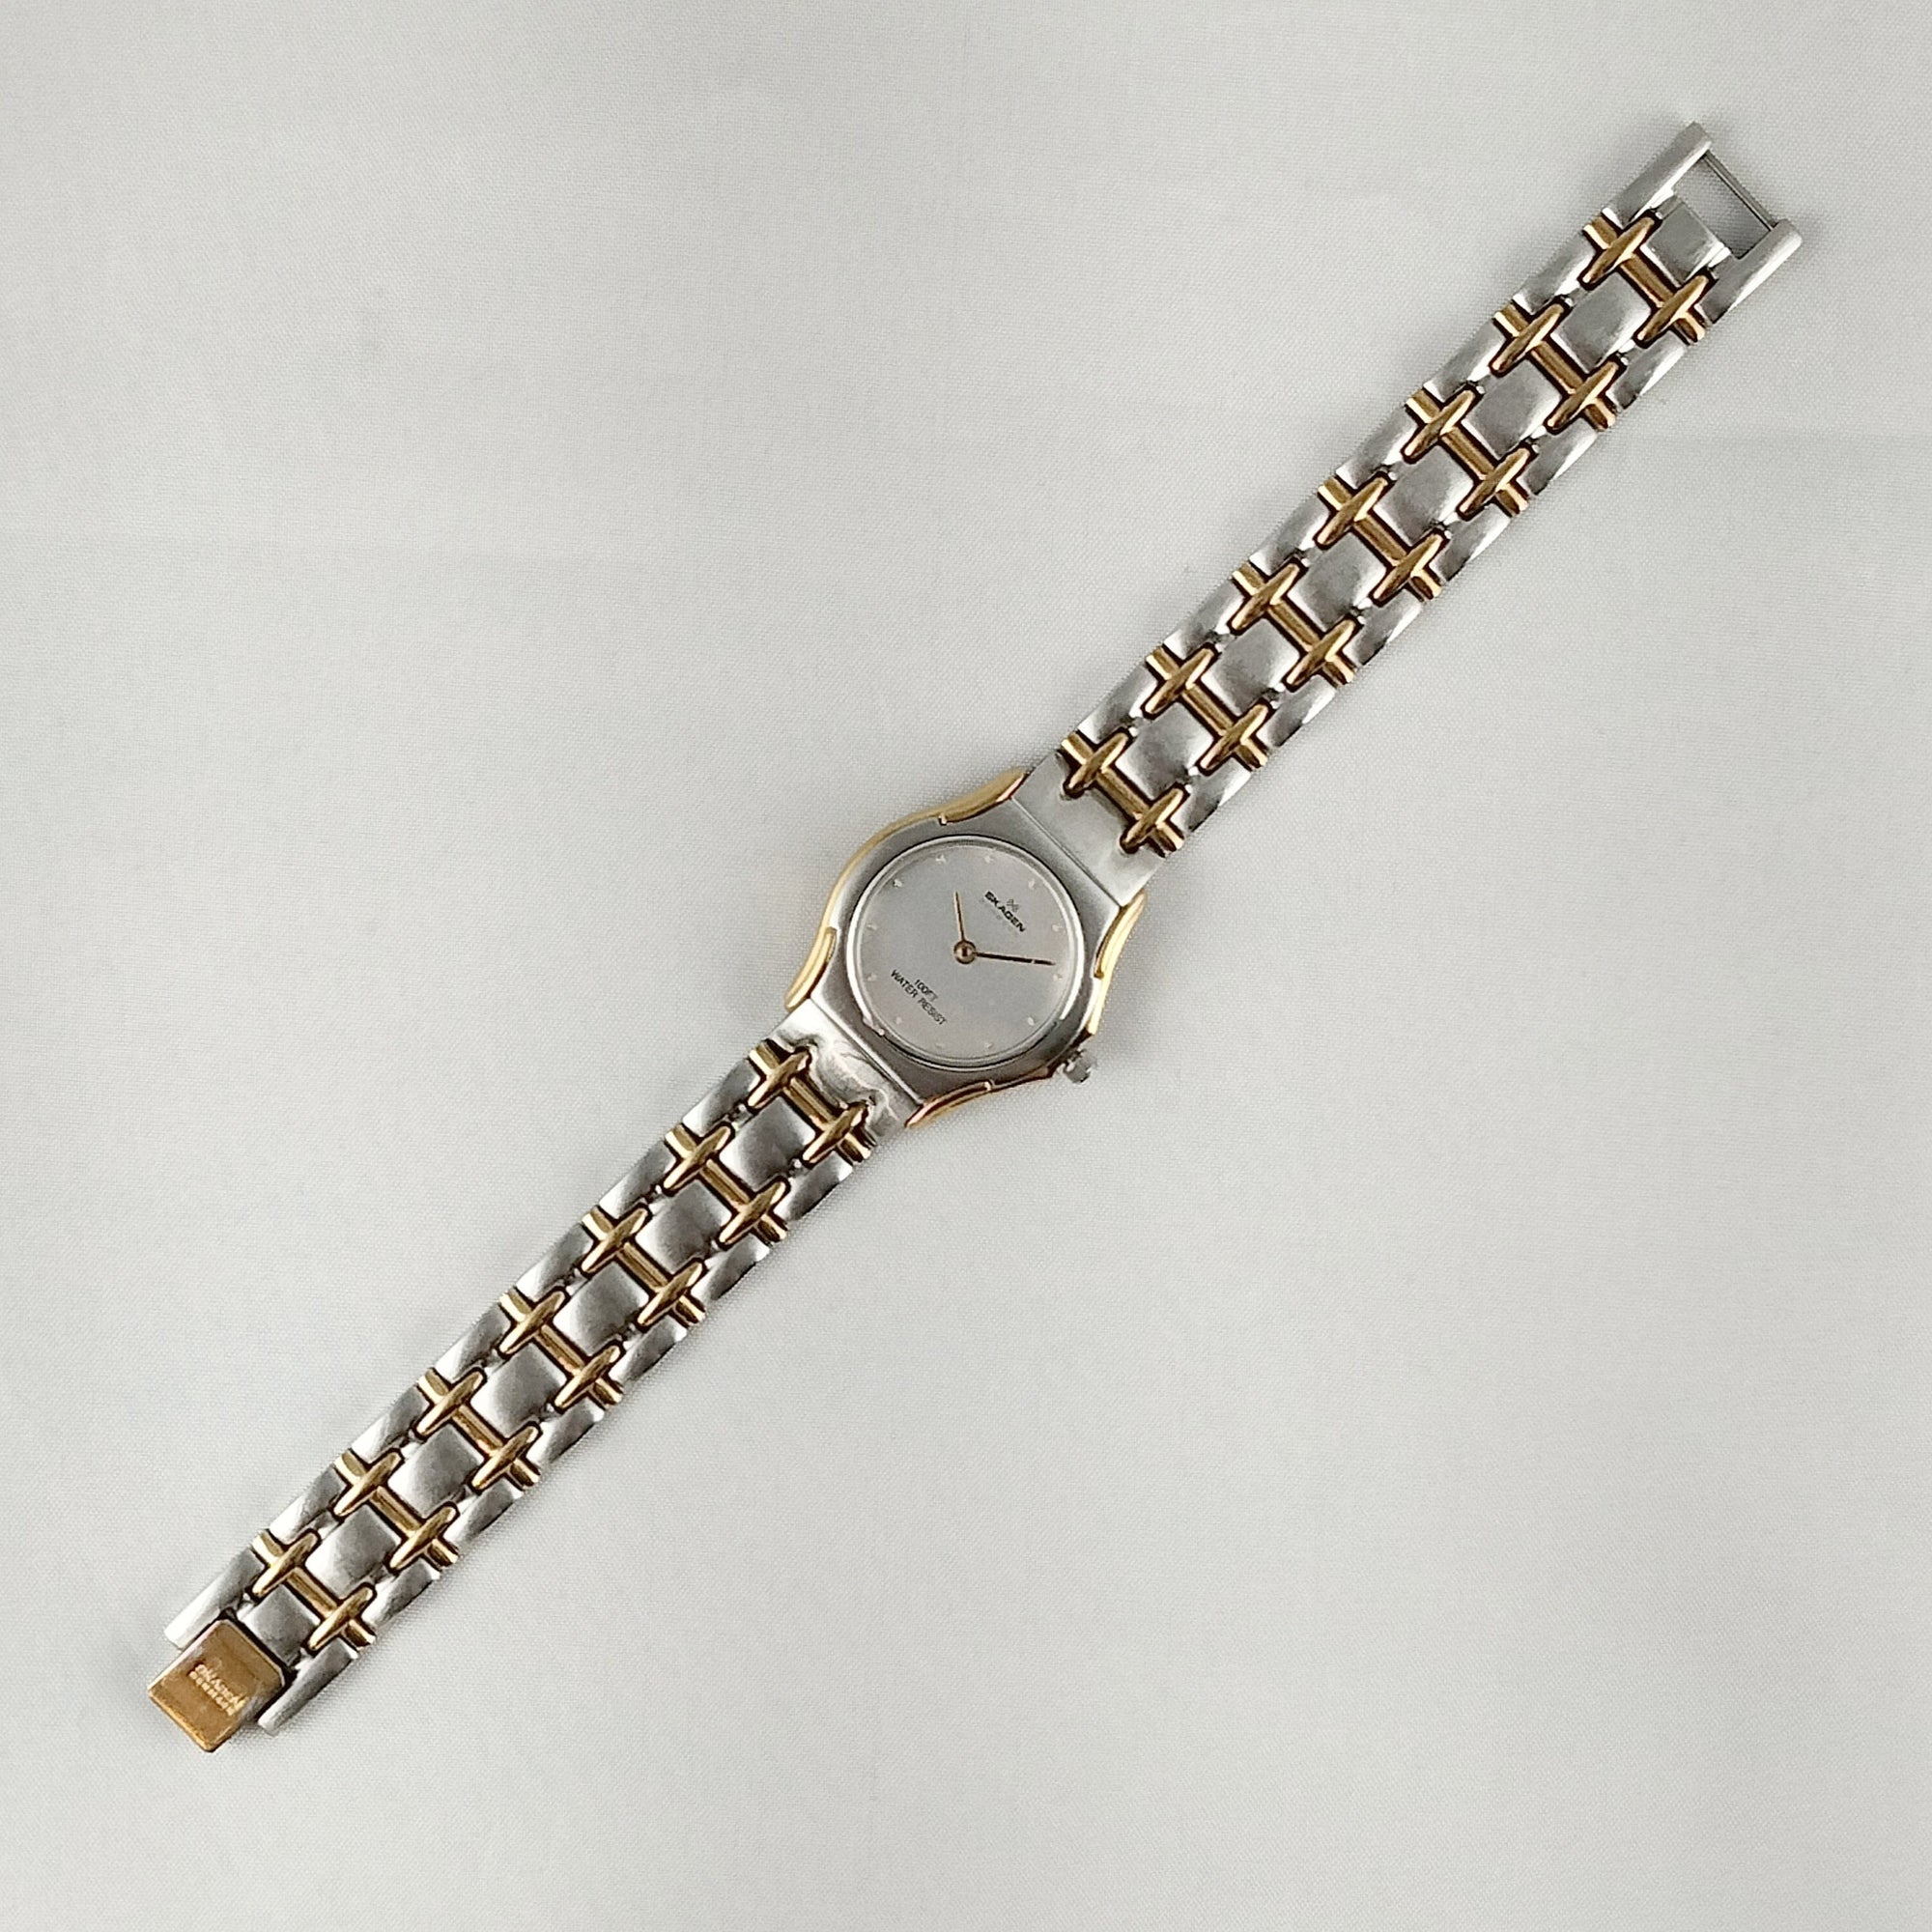 I Like Mikes Mid Century Modern Watches Skagen Stainless Steel Women's Watch, Gold Tone Hour Markers and Details, Bracelet Strap